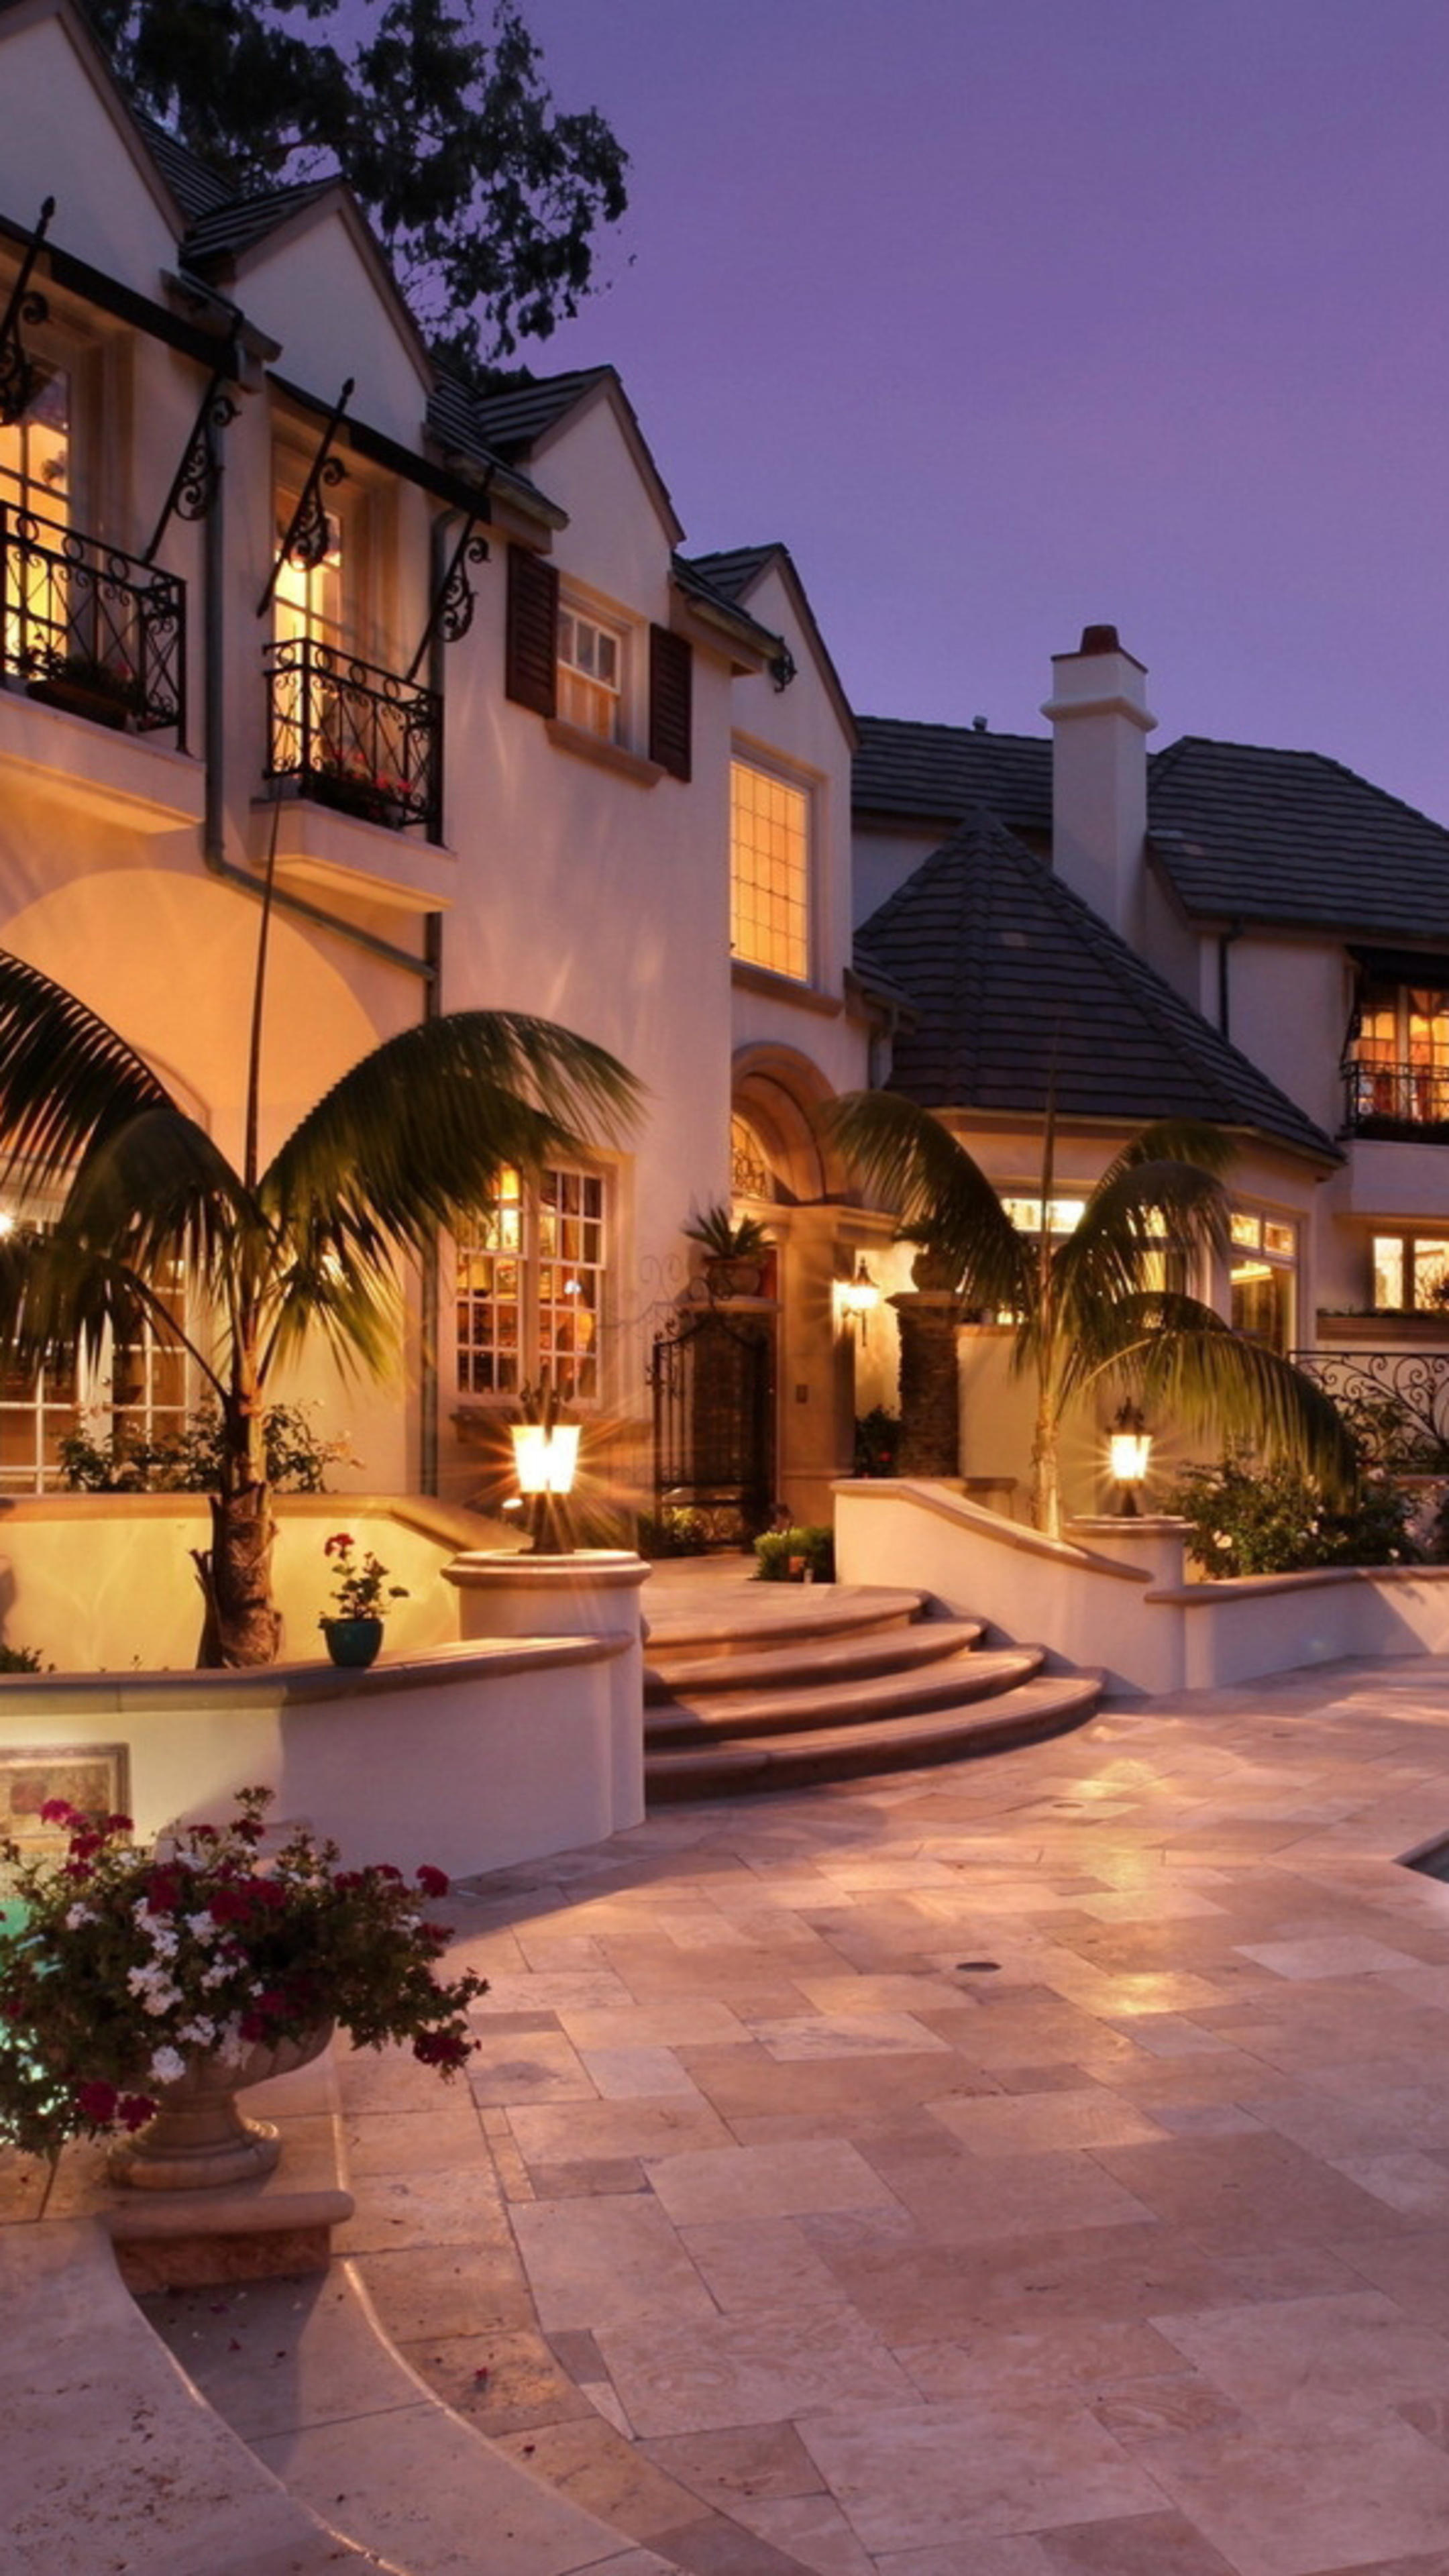 Mansion: Fancy residence, Garden flowers and palms, Two-story building. 2160x3840 4K Background.